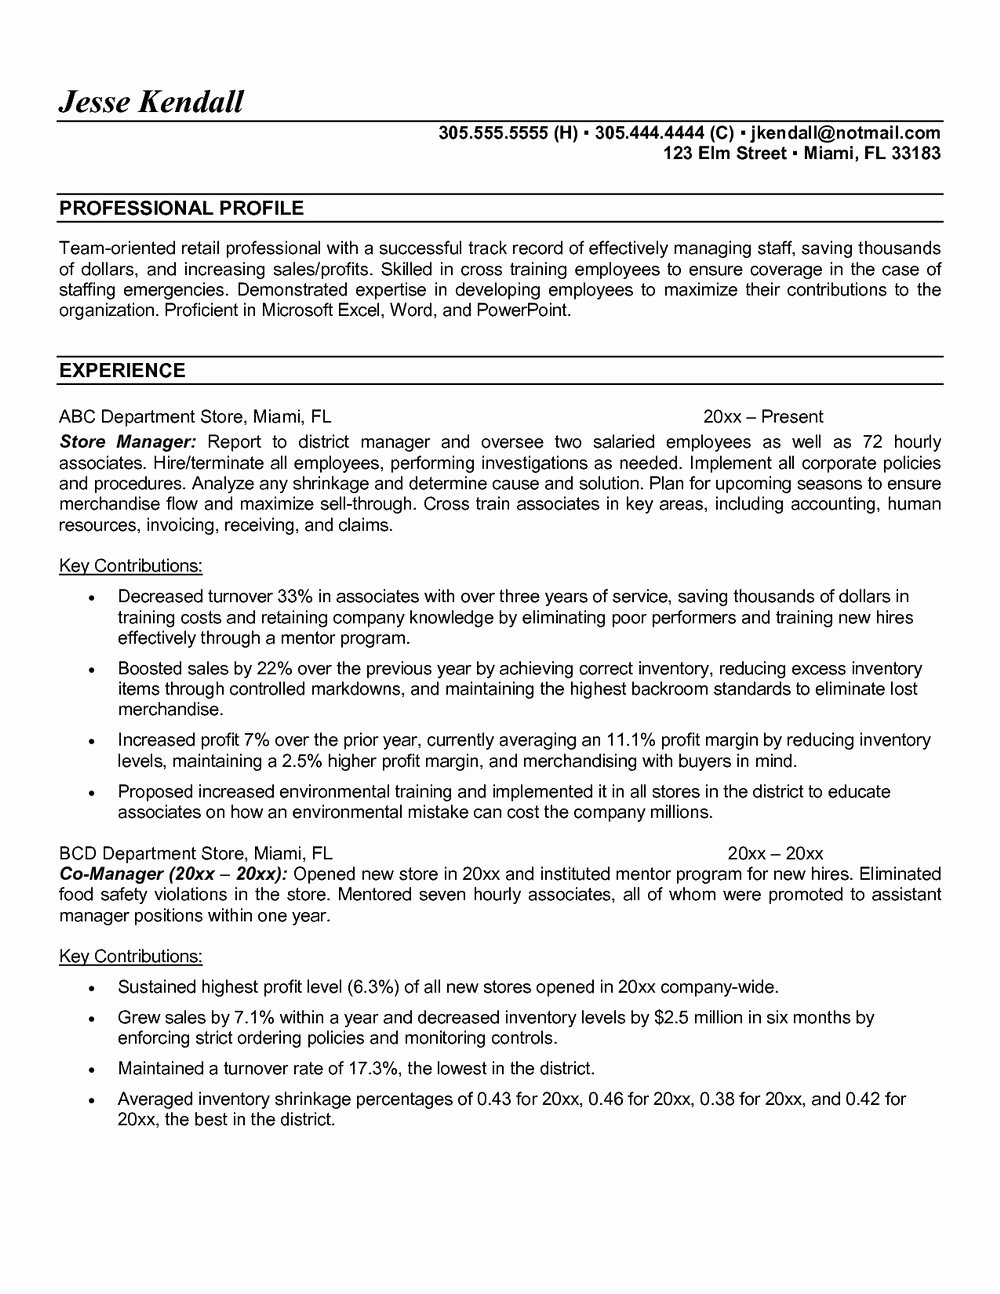 Resume for Rn Position Resumes 2685